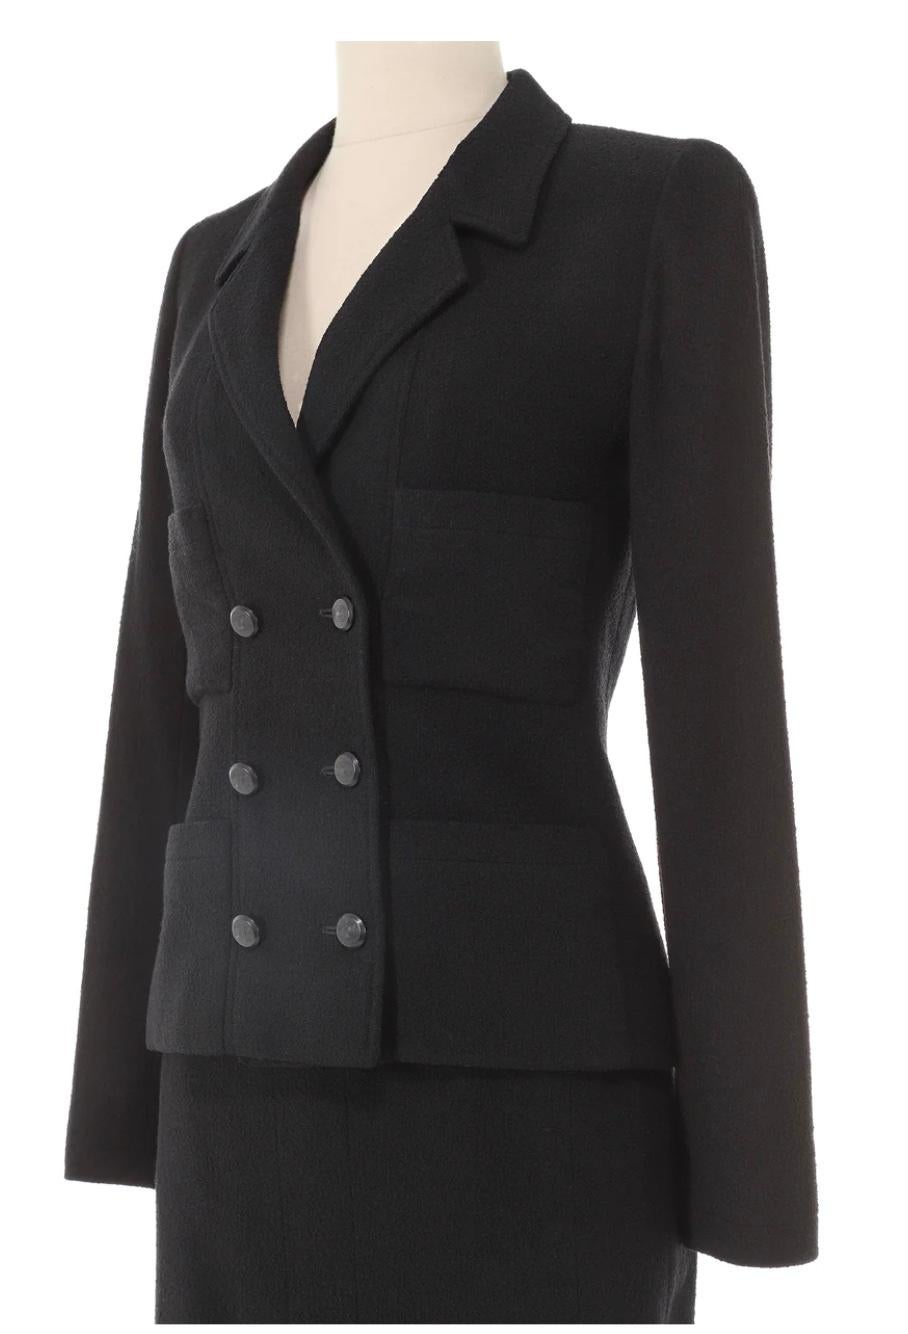 Chanel Fall 1998 Skirt Suit In Excellent Condition For Sale In New York, NY